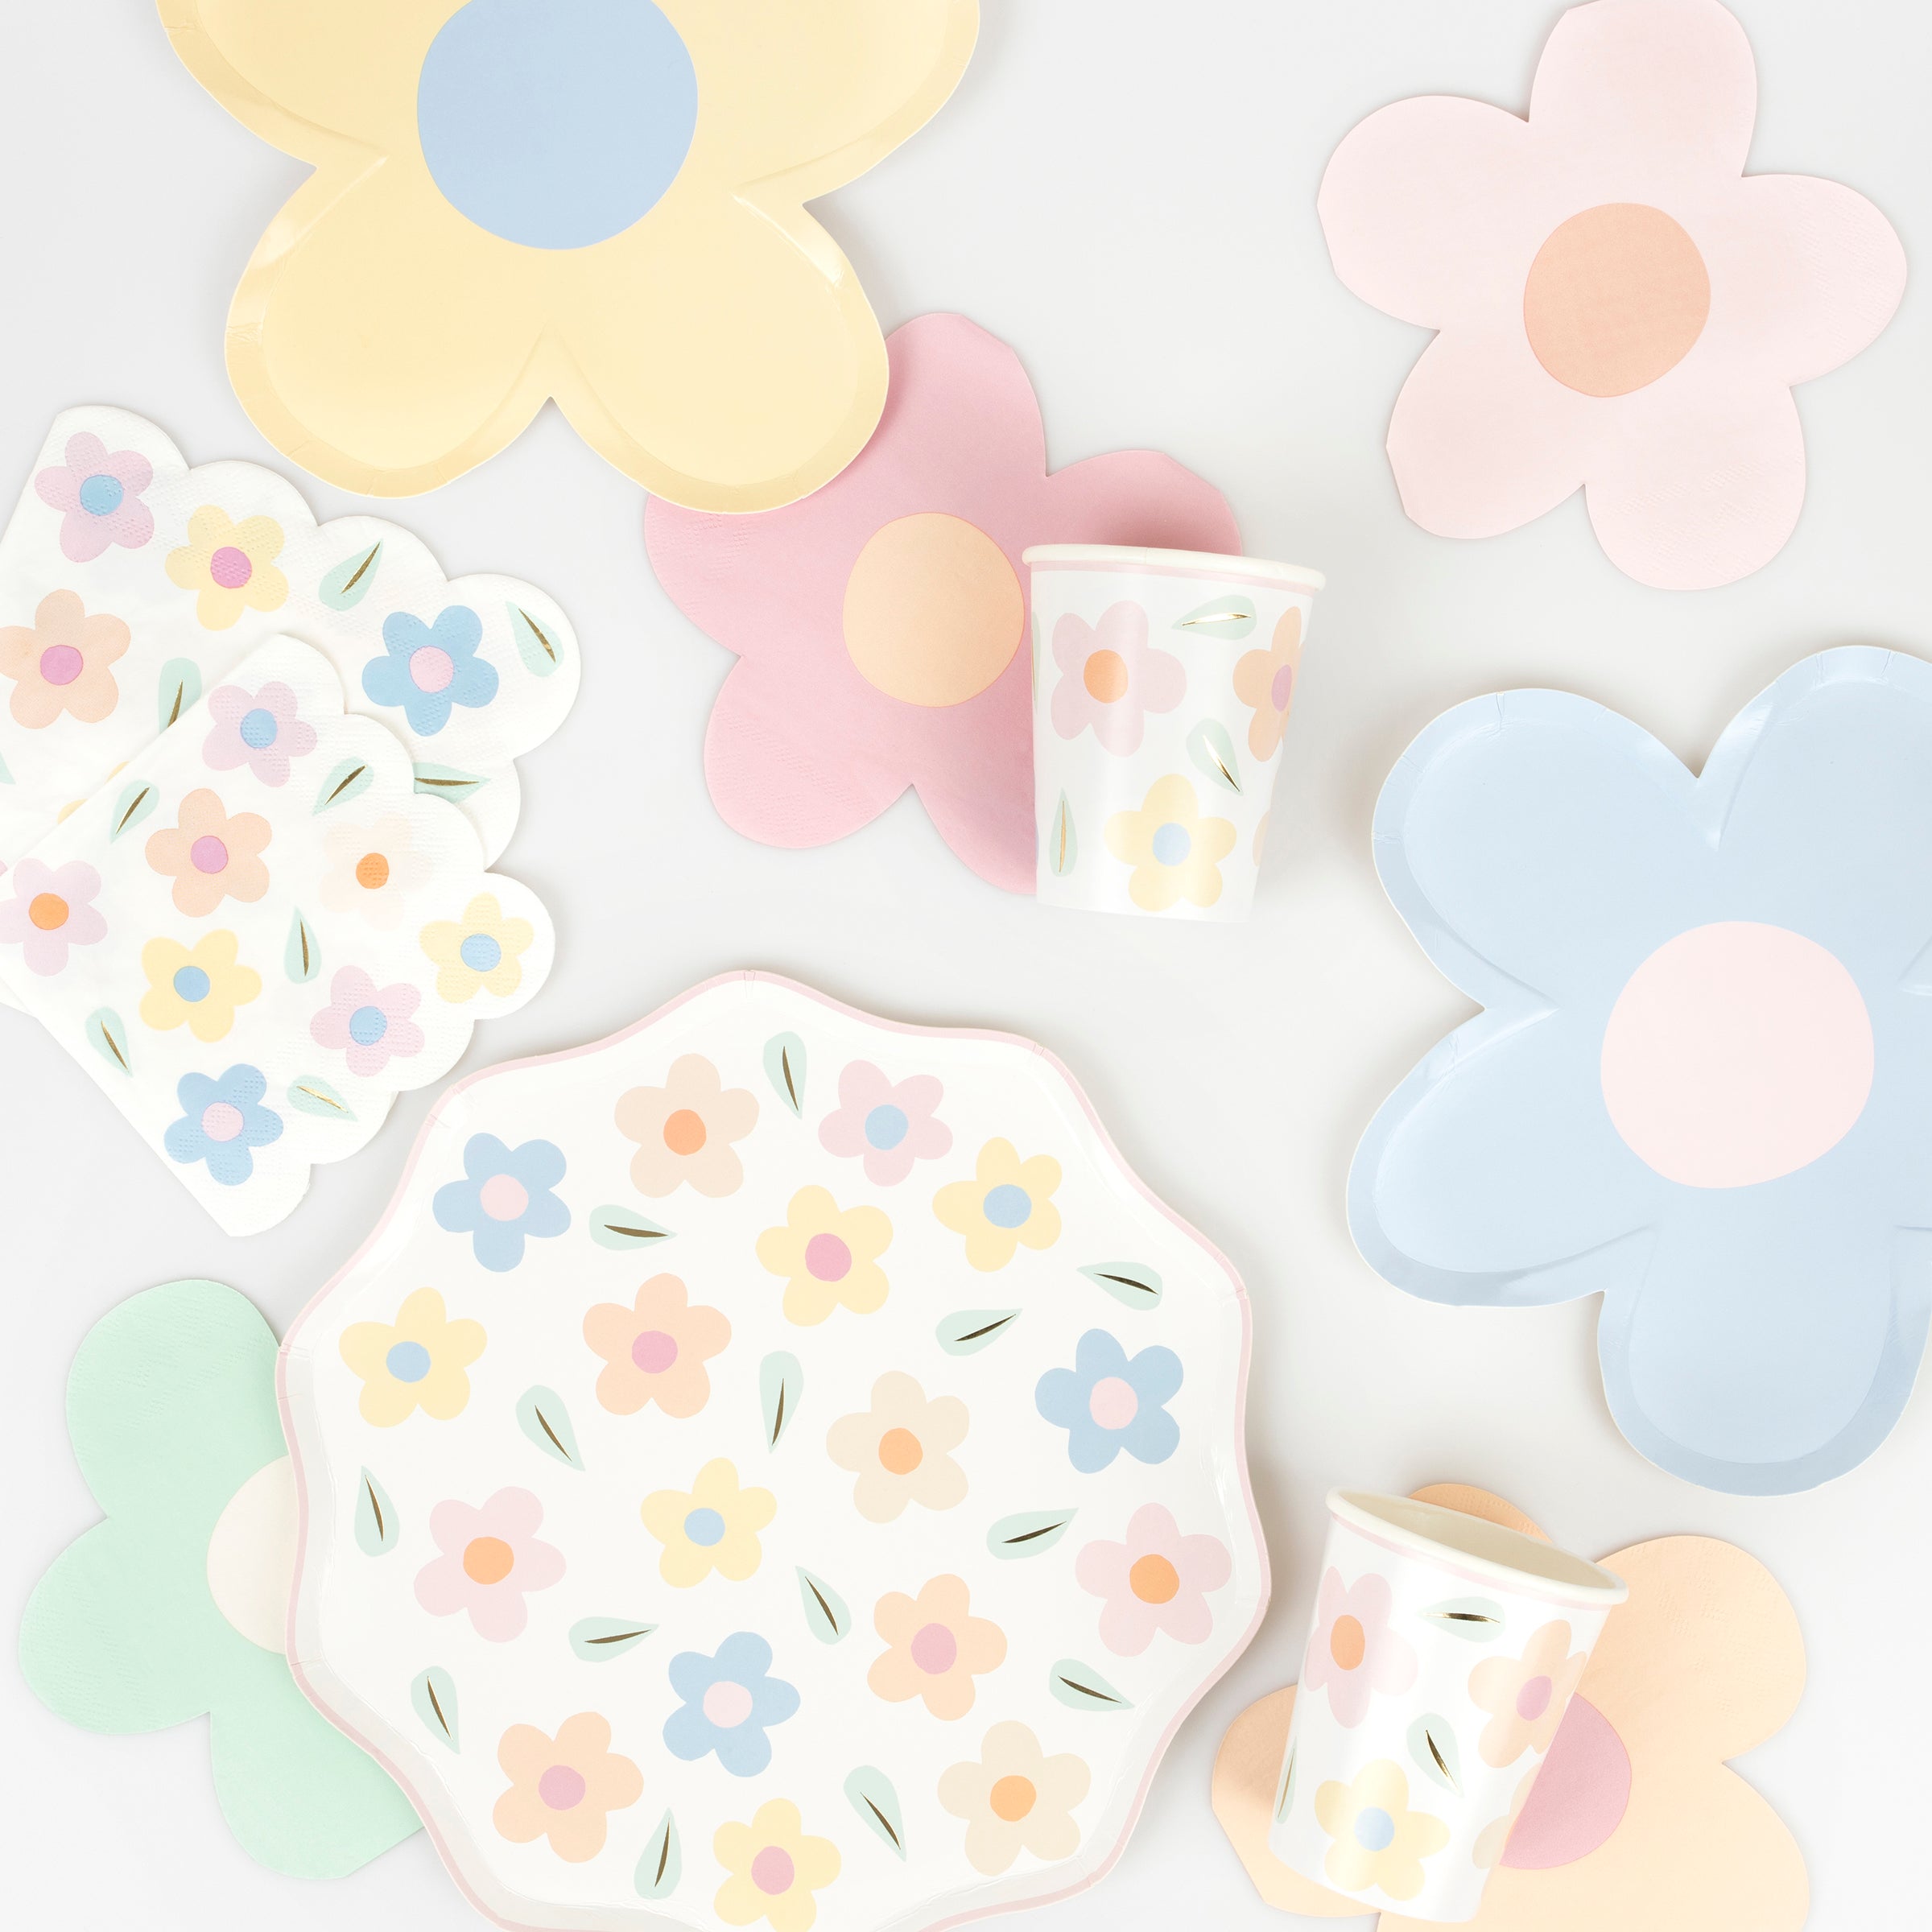 Our paper plates, with floral designs, have pink scalloped borders and shiny gold foil details.